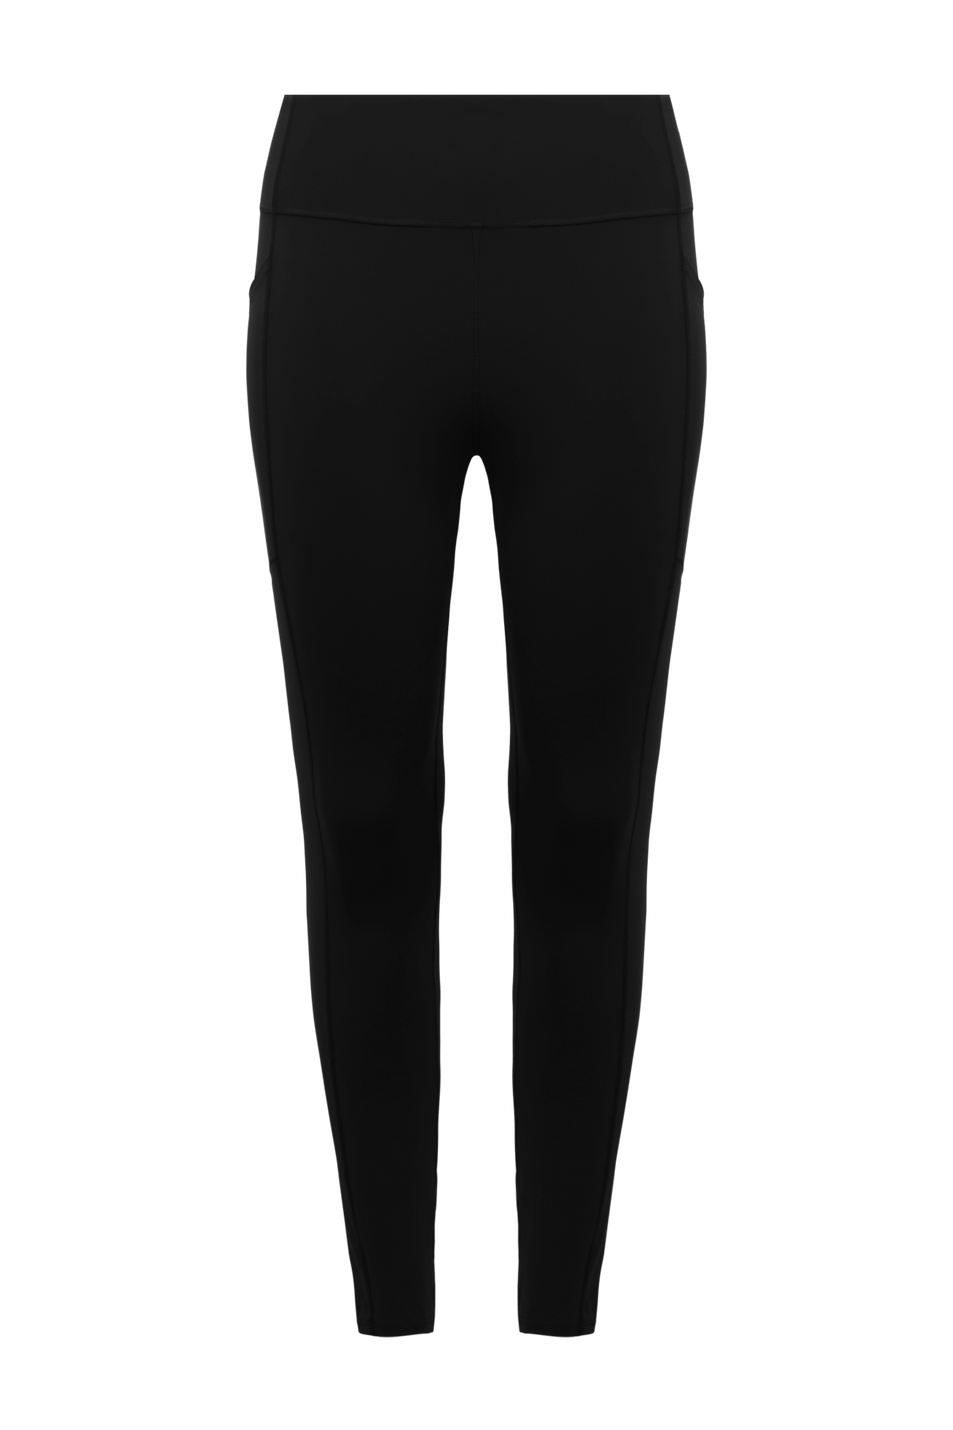 Buy ACTIVE COMPRESSION PANT online at Intimo